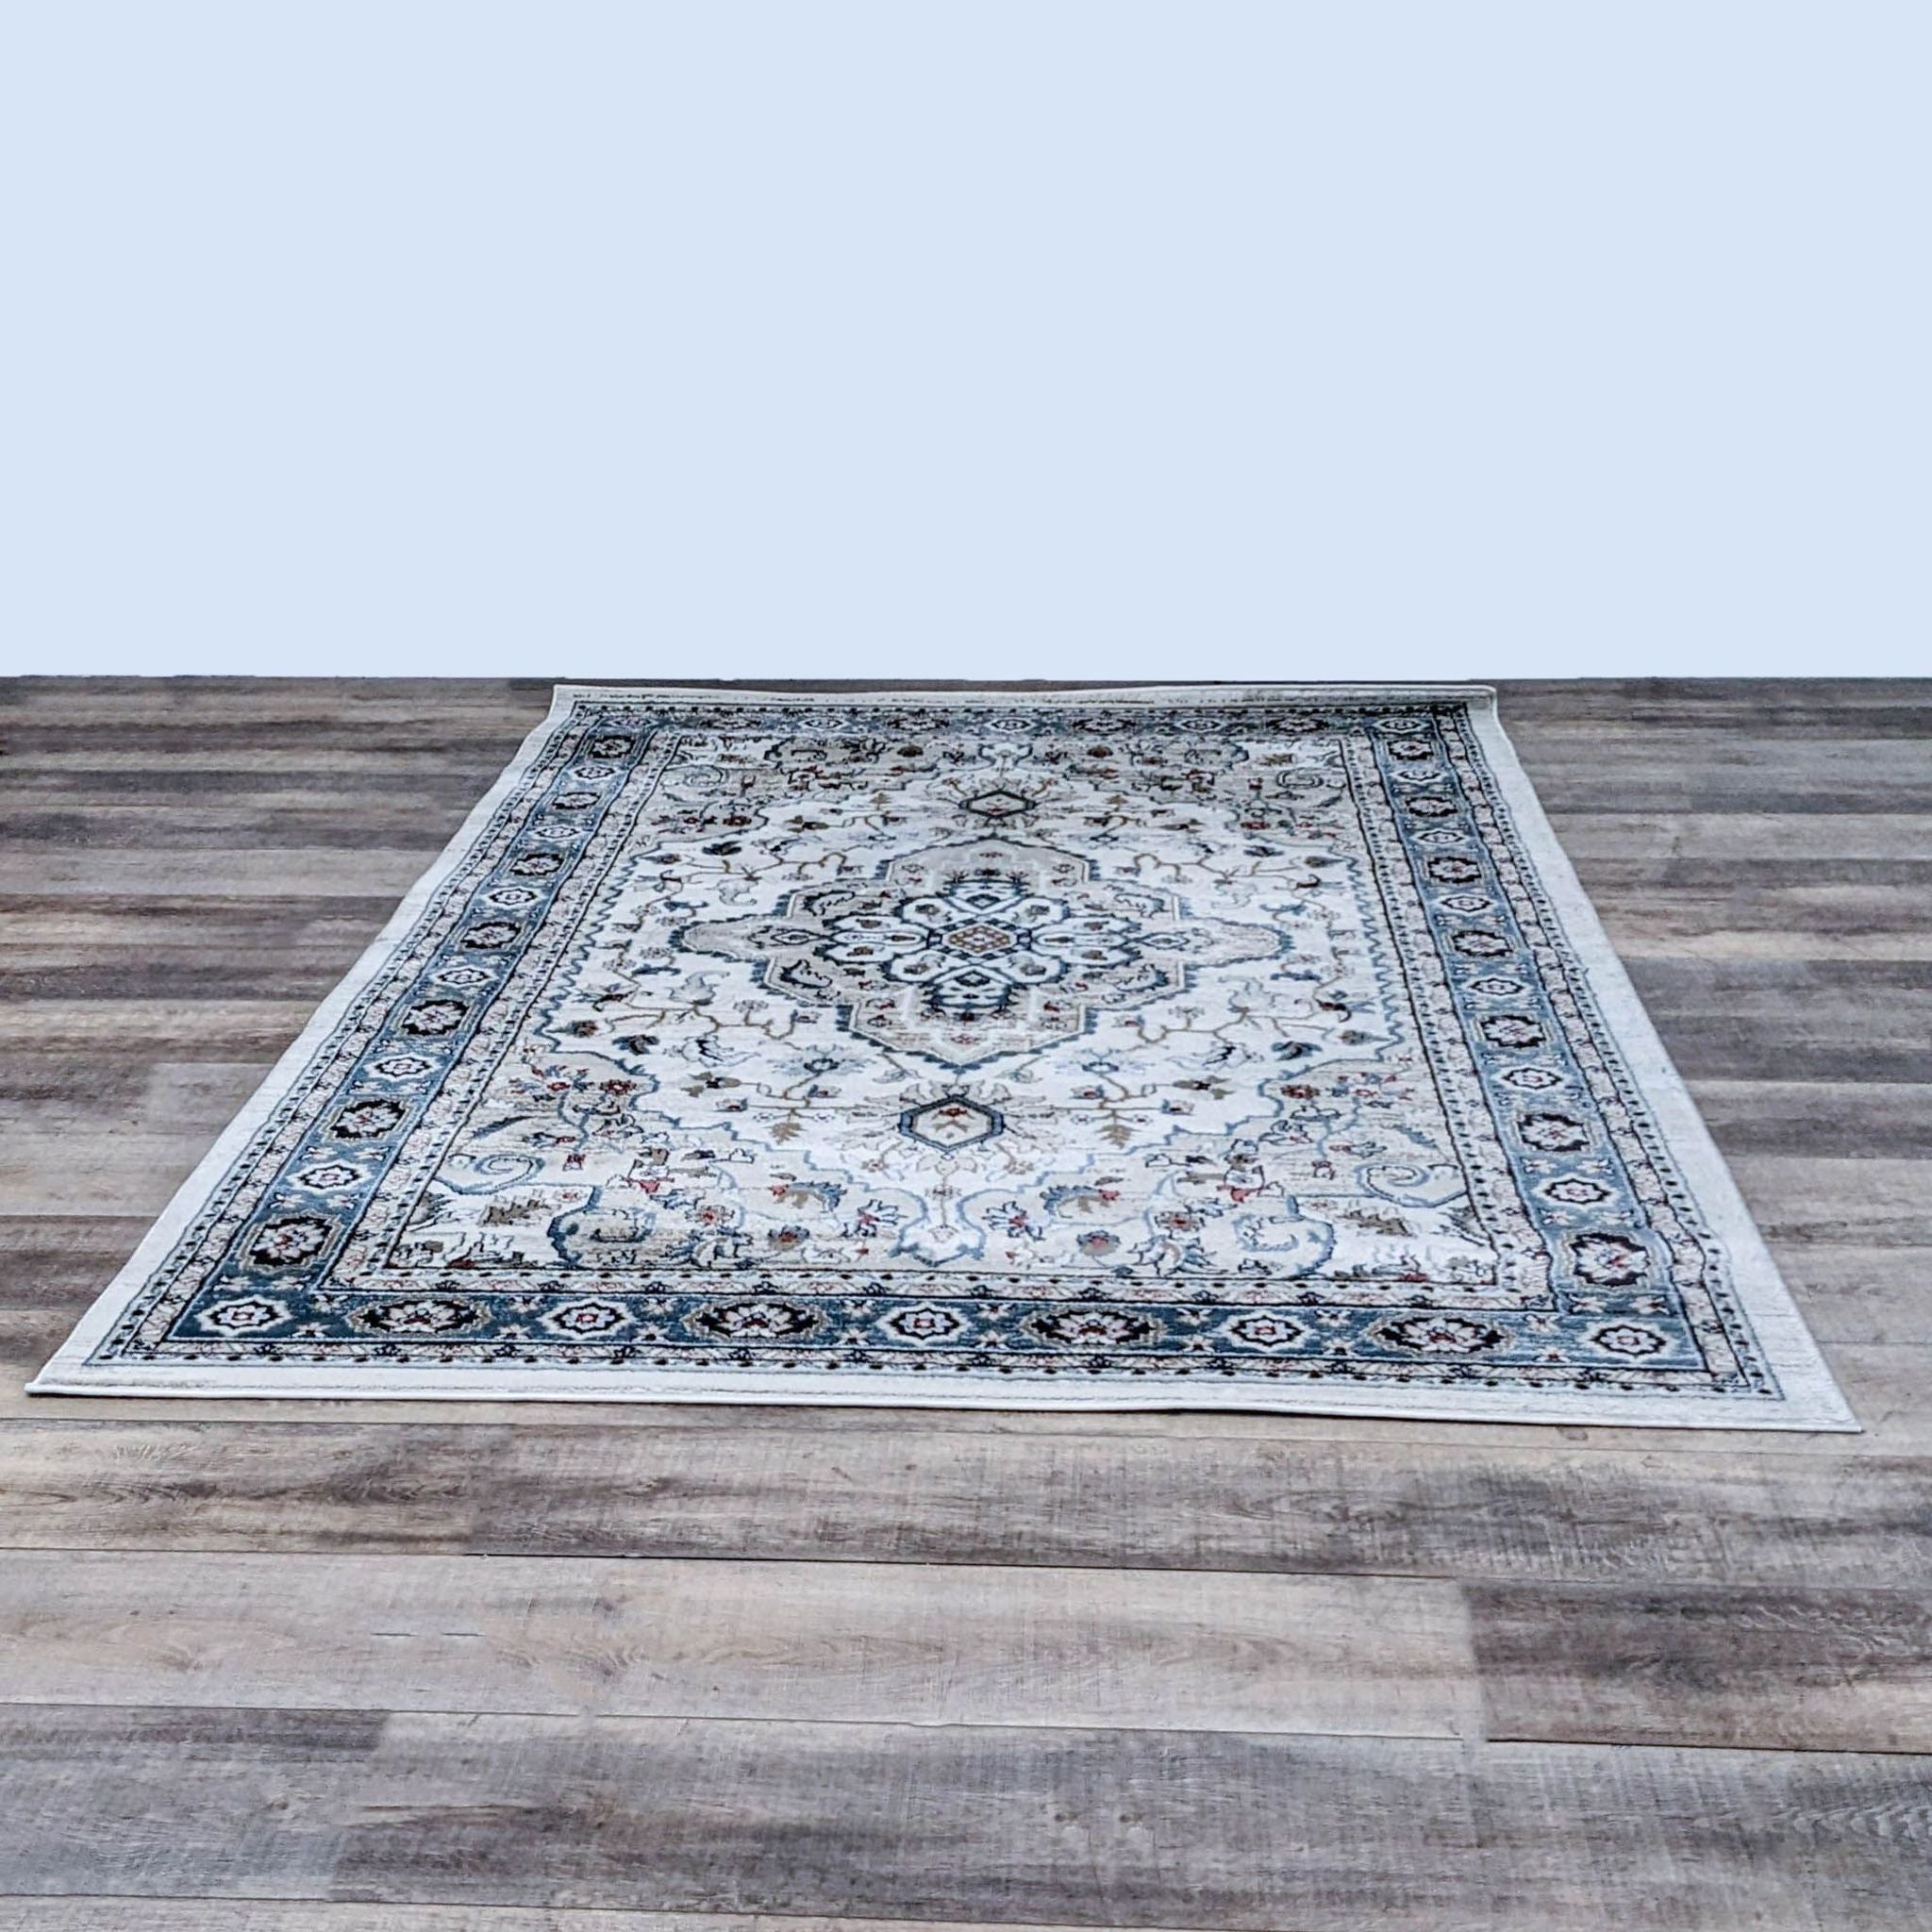 Reperch branded 6'x9' area rug with central medallion and intricate floral patterns on a wooden floor.